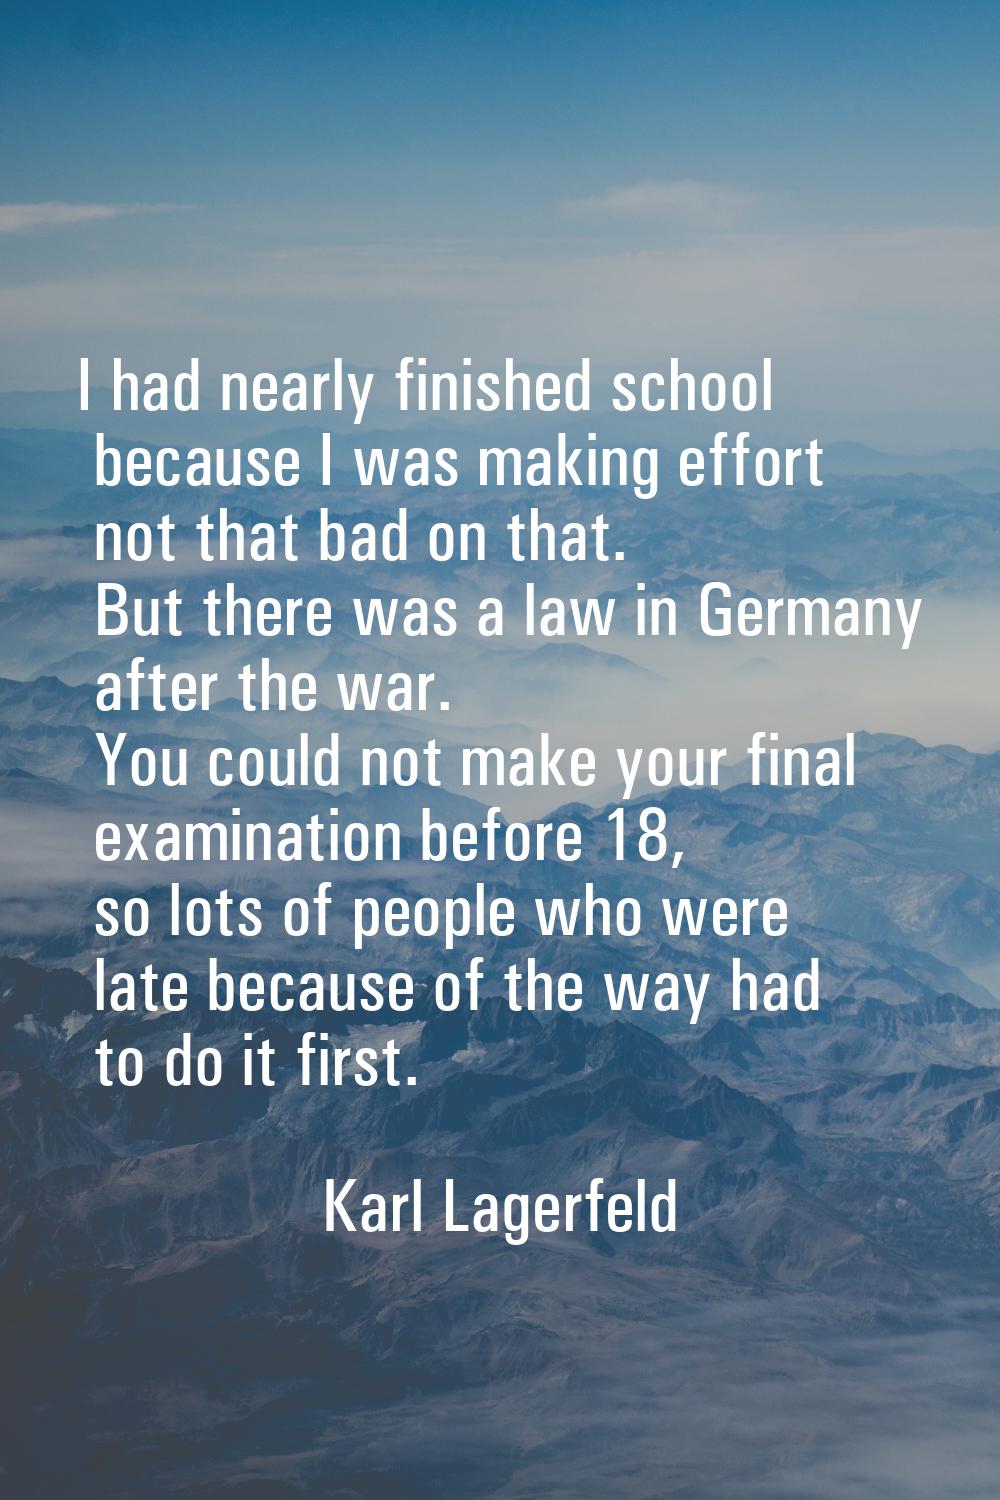 I had nearly finished school because I was making effort not that bad on that. But there was a law 